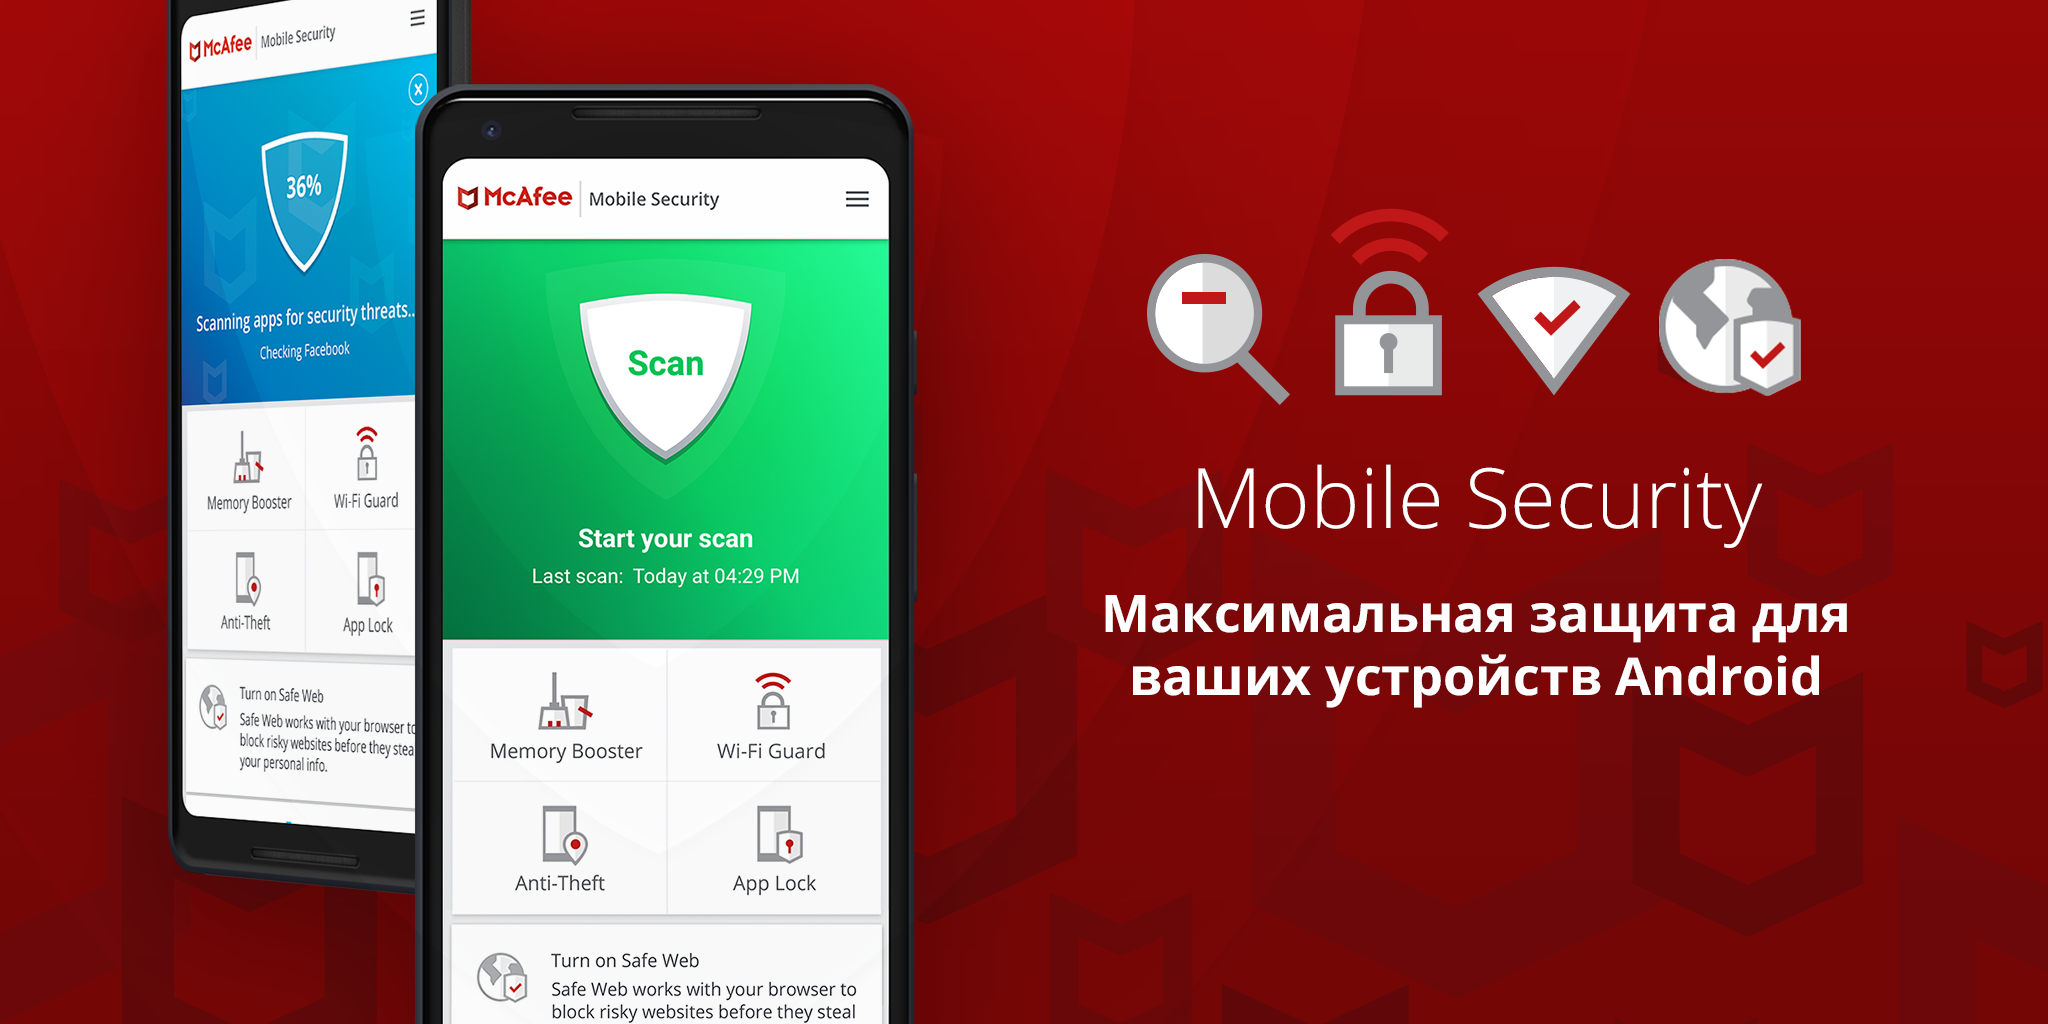 Mcafee browser. MCAFEE антивирус. MCAFEE mobile Security. MCAFEE Security: VPN-защита и антивирус. MCAFEE Security приложение.